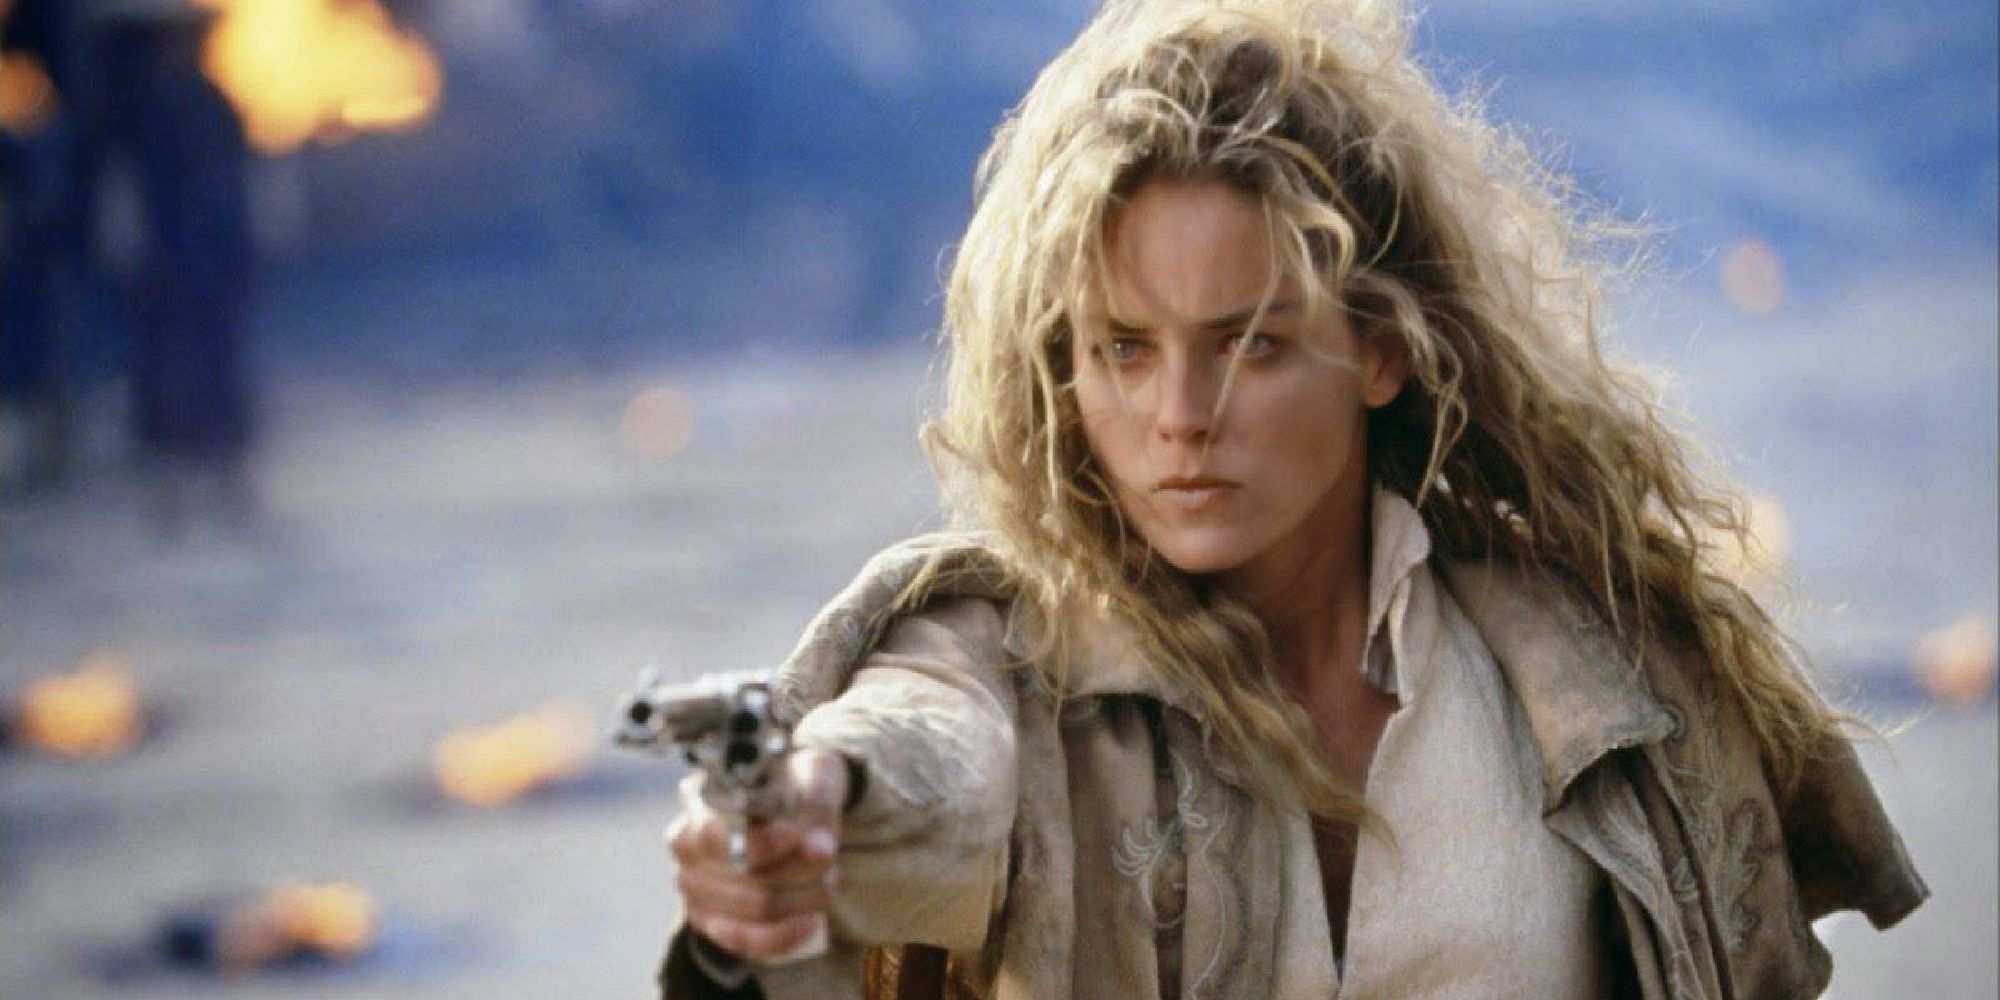 Sharon Stone as Ellen aiming a gun at someone off-camera in The Quick and the Dead